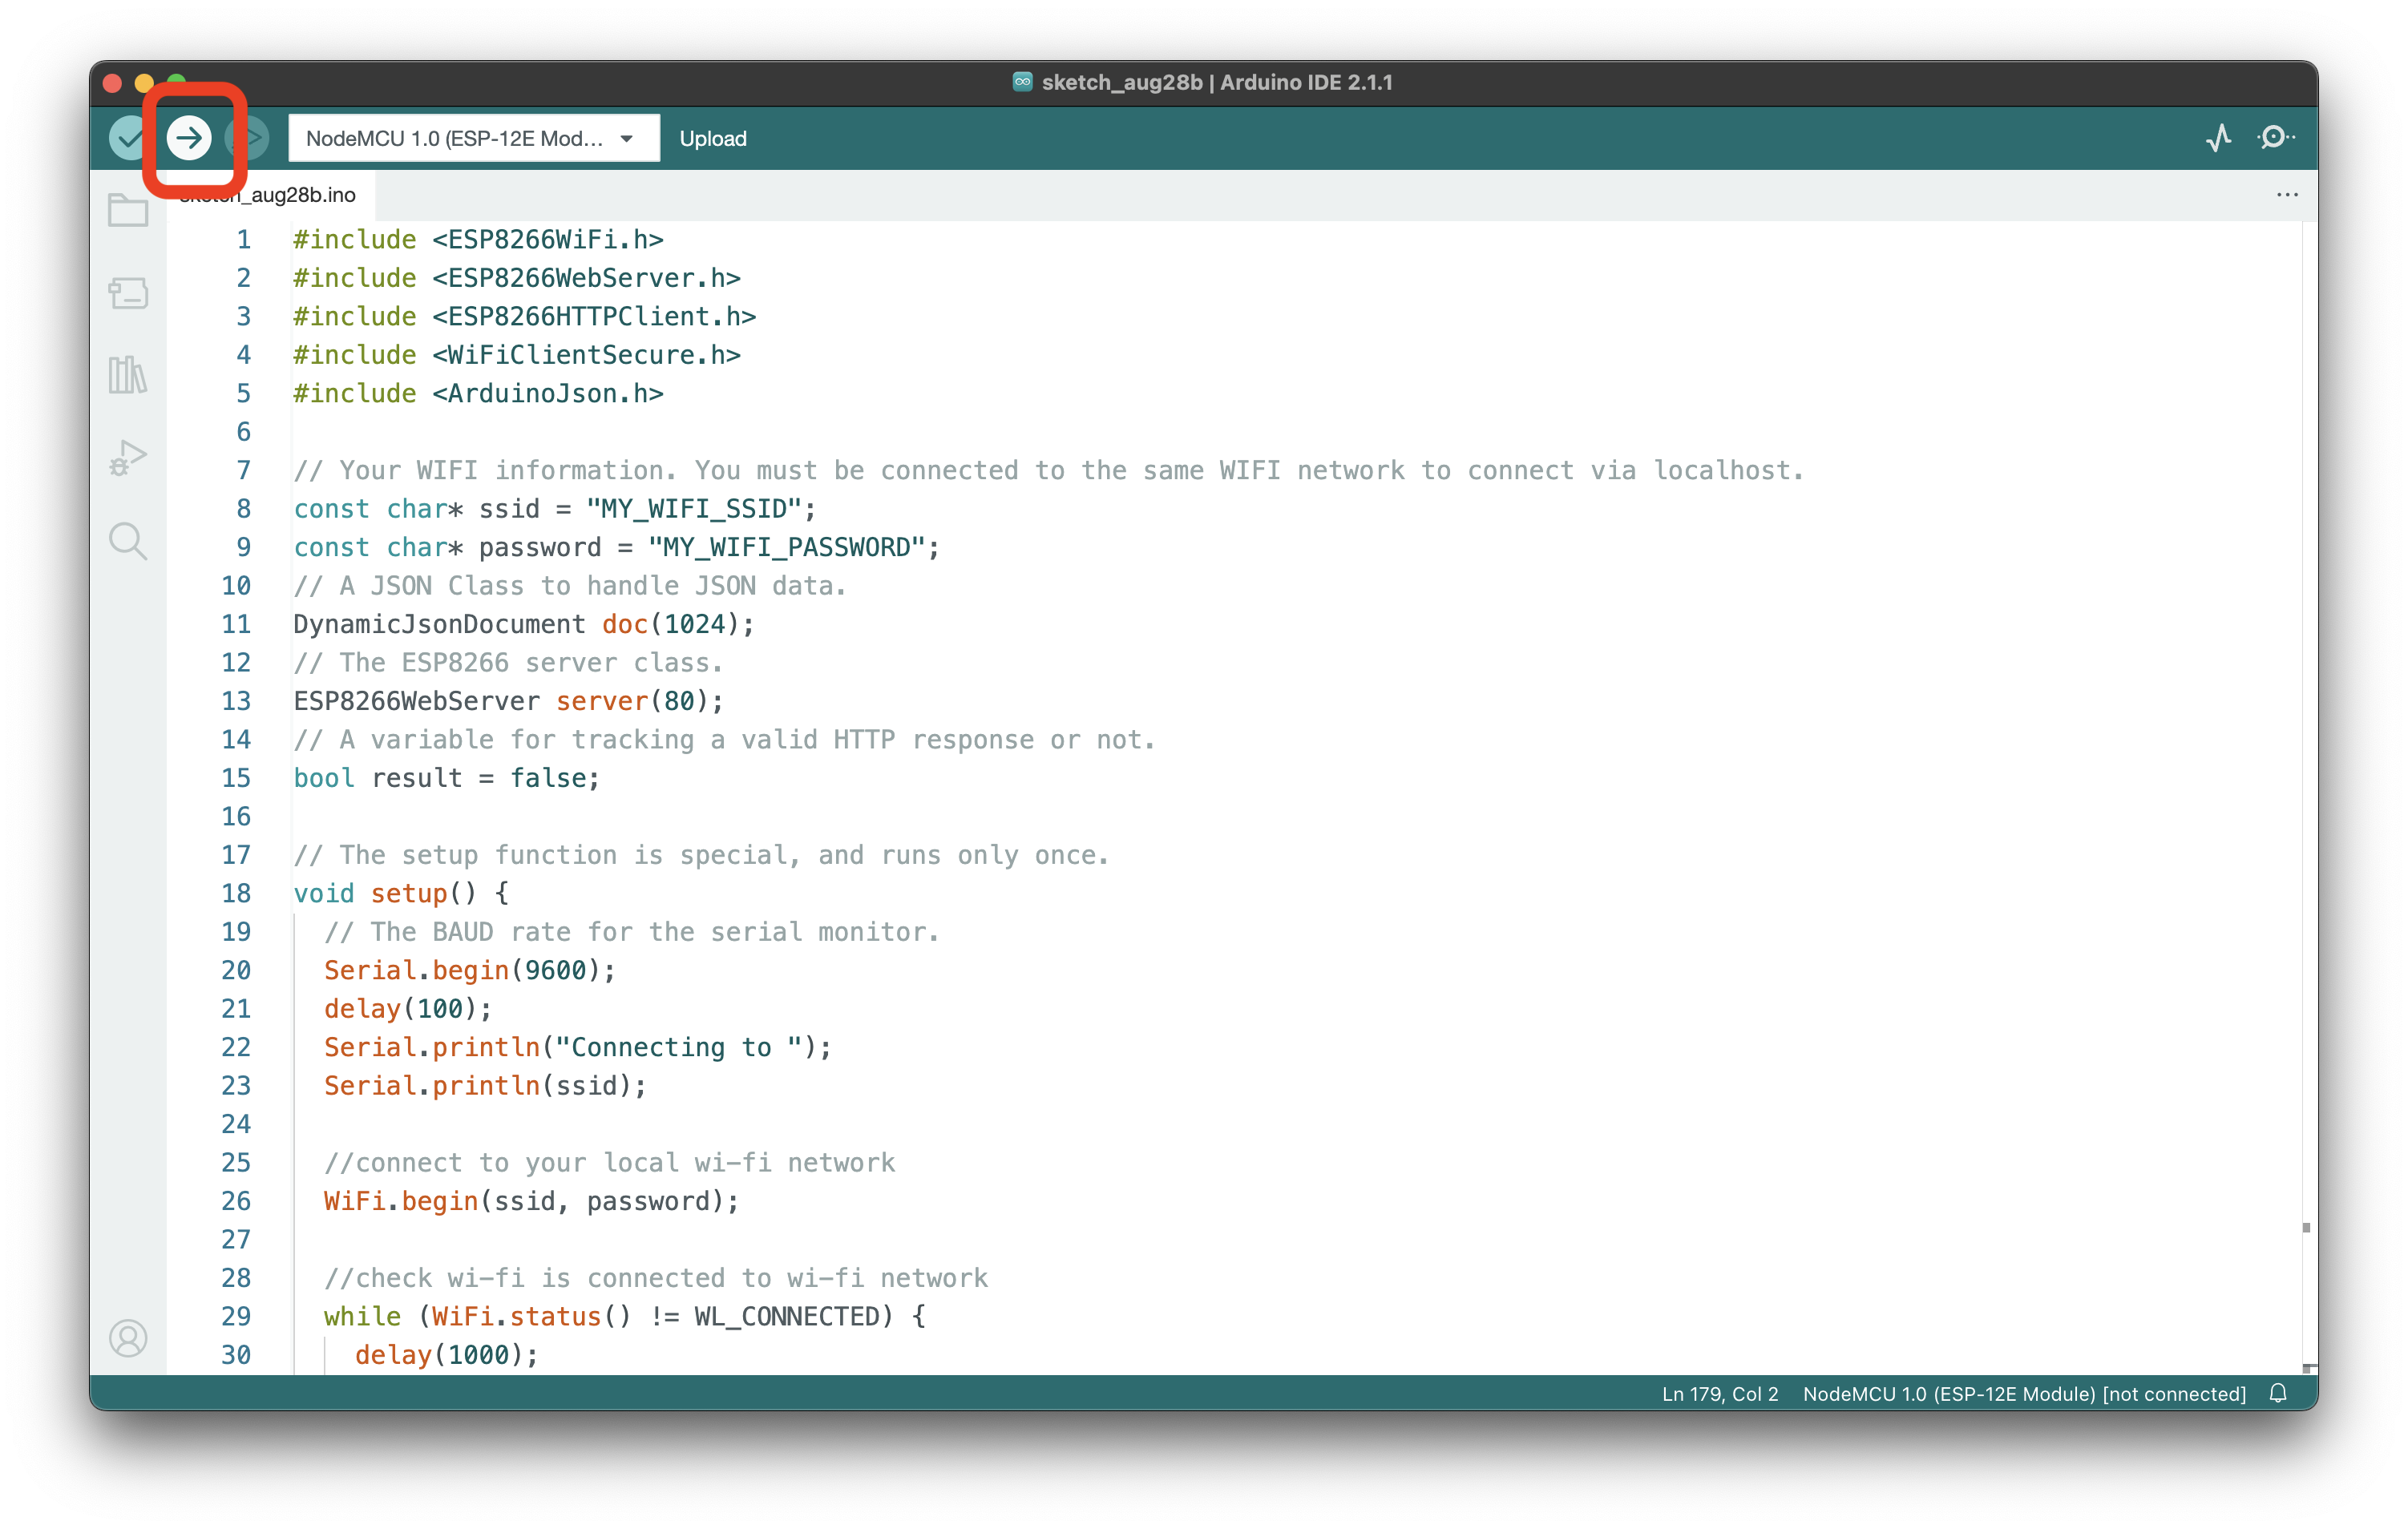 Screenshot: The upload button in the Arduino IDE.